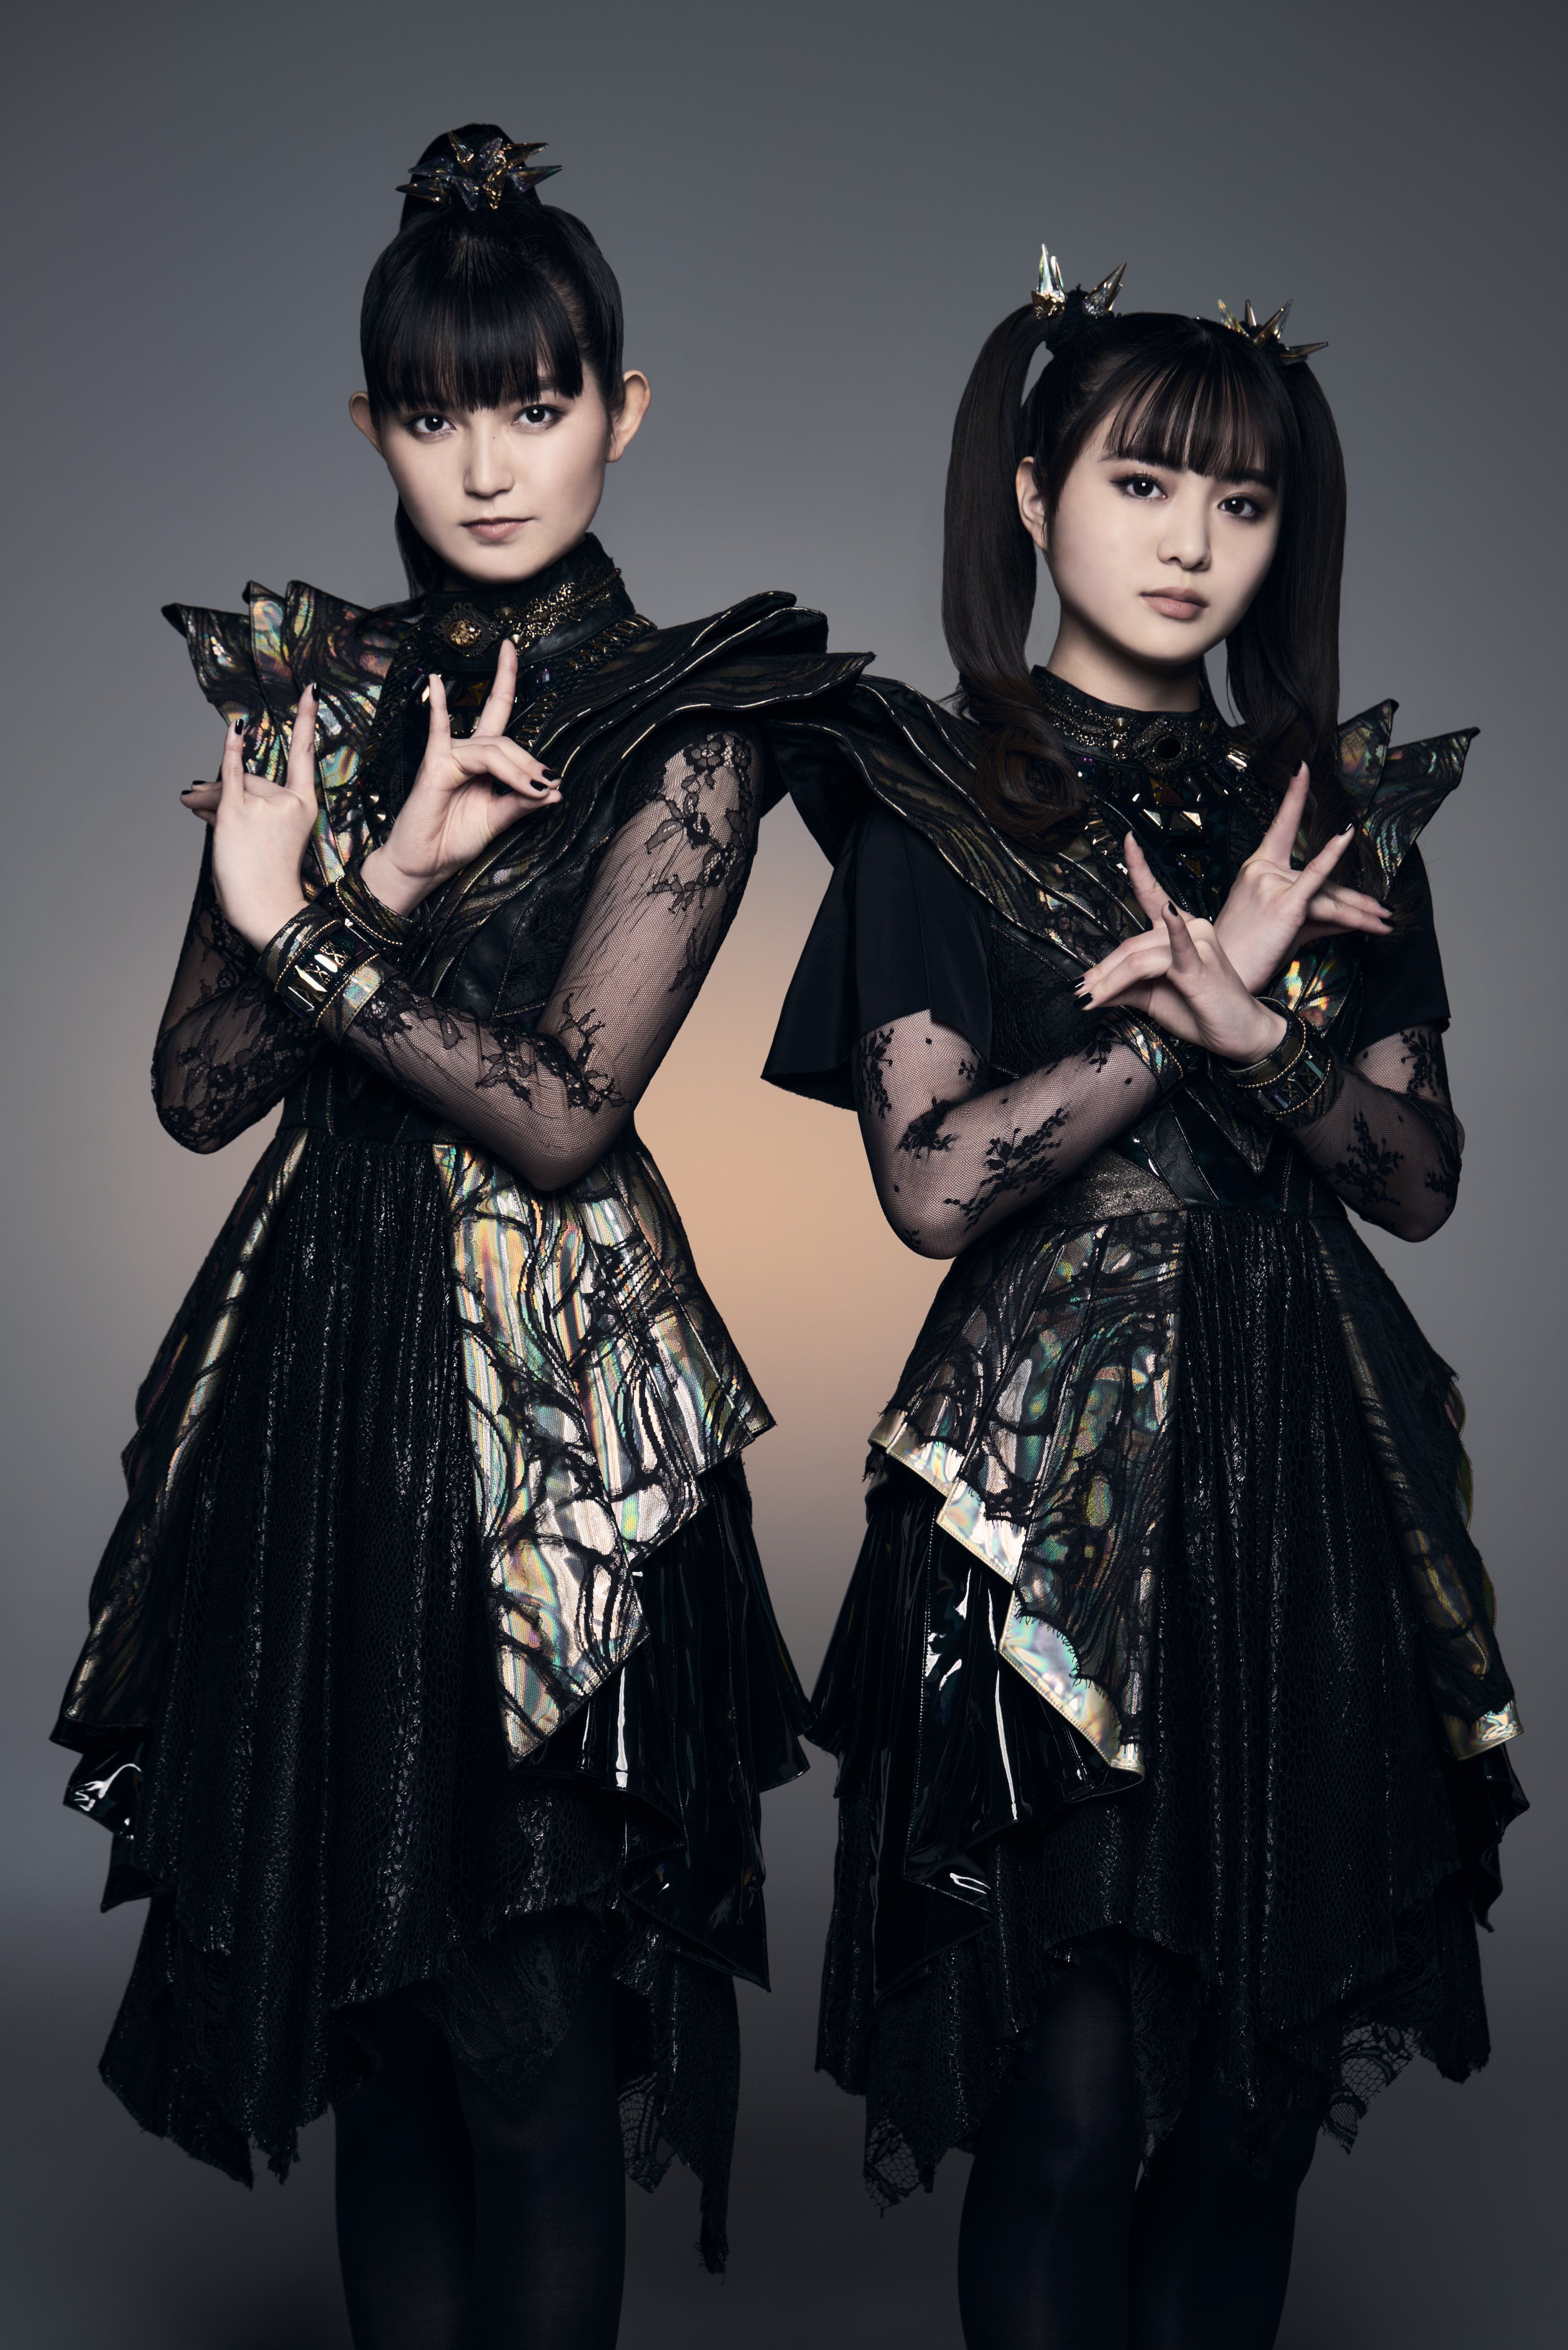 BABYMETAL Break Free From Their Kawaii Chains on 